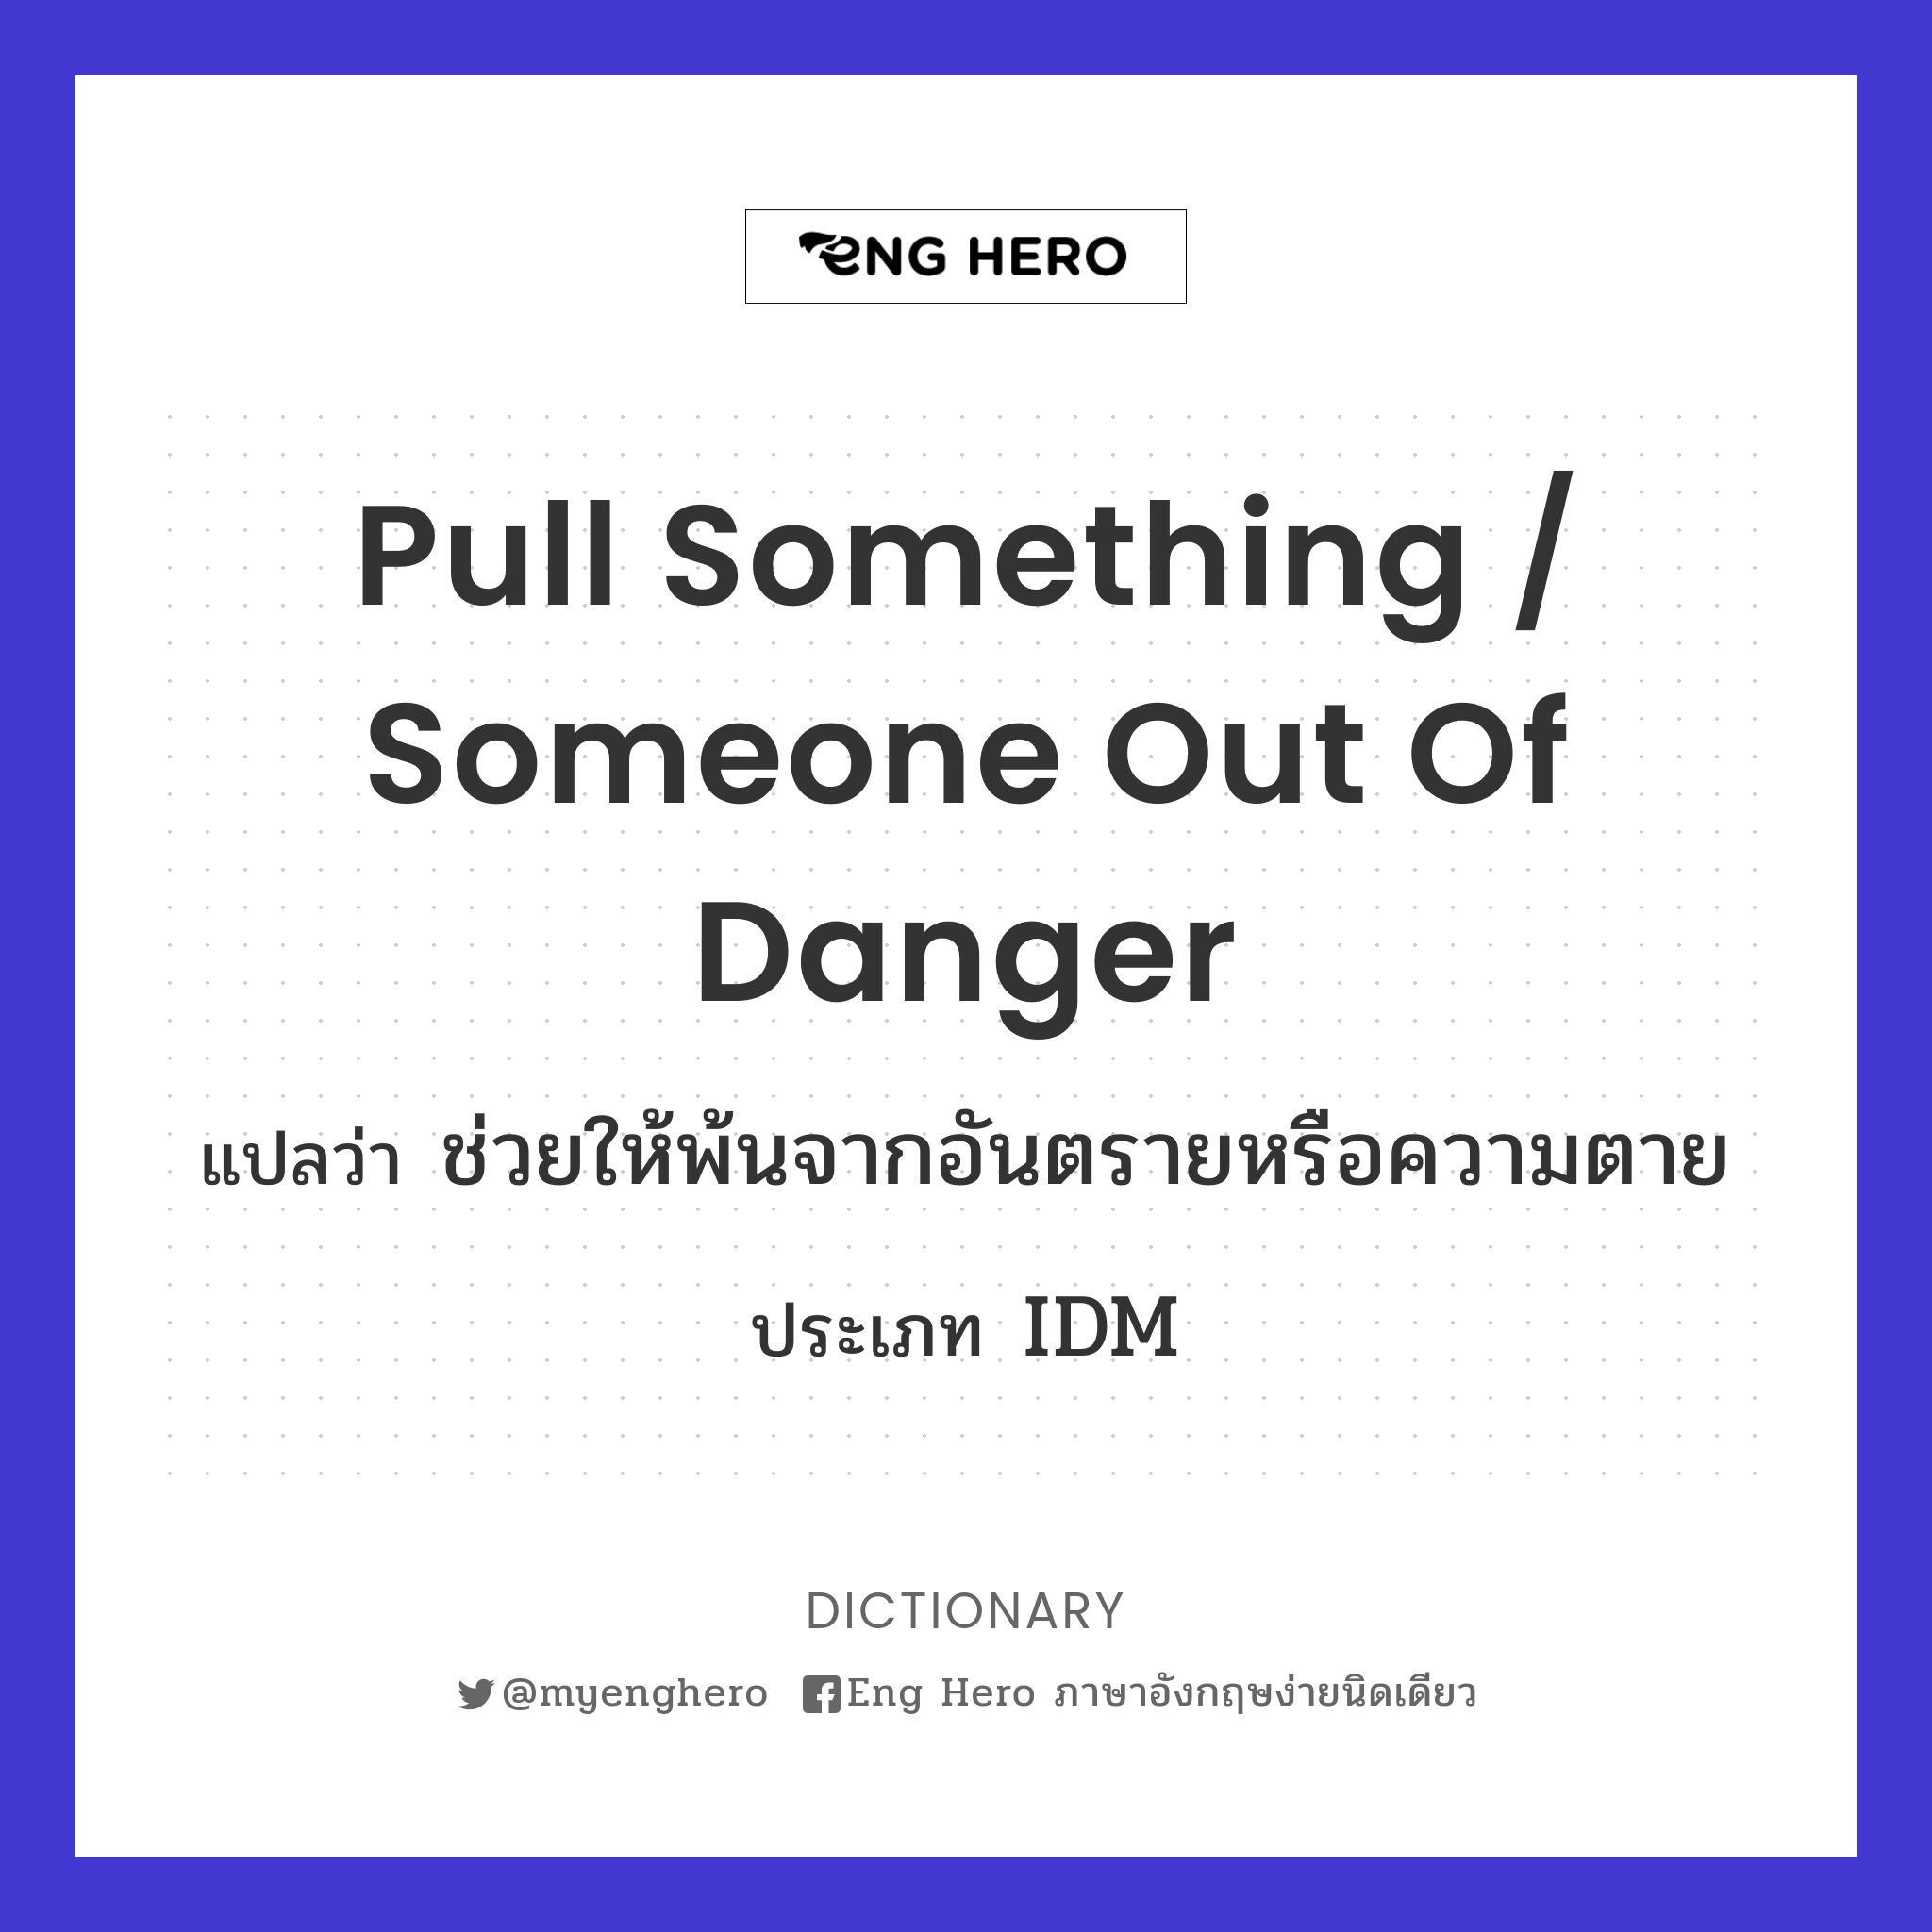 pull something / someone out of danger